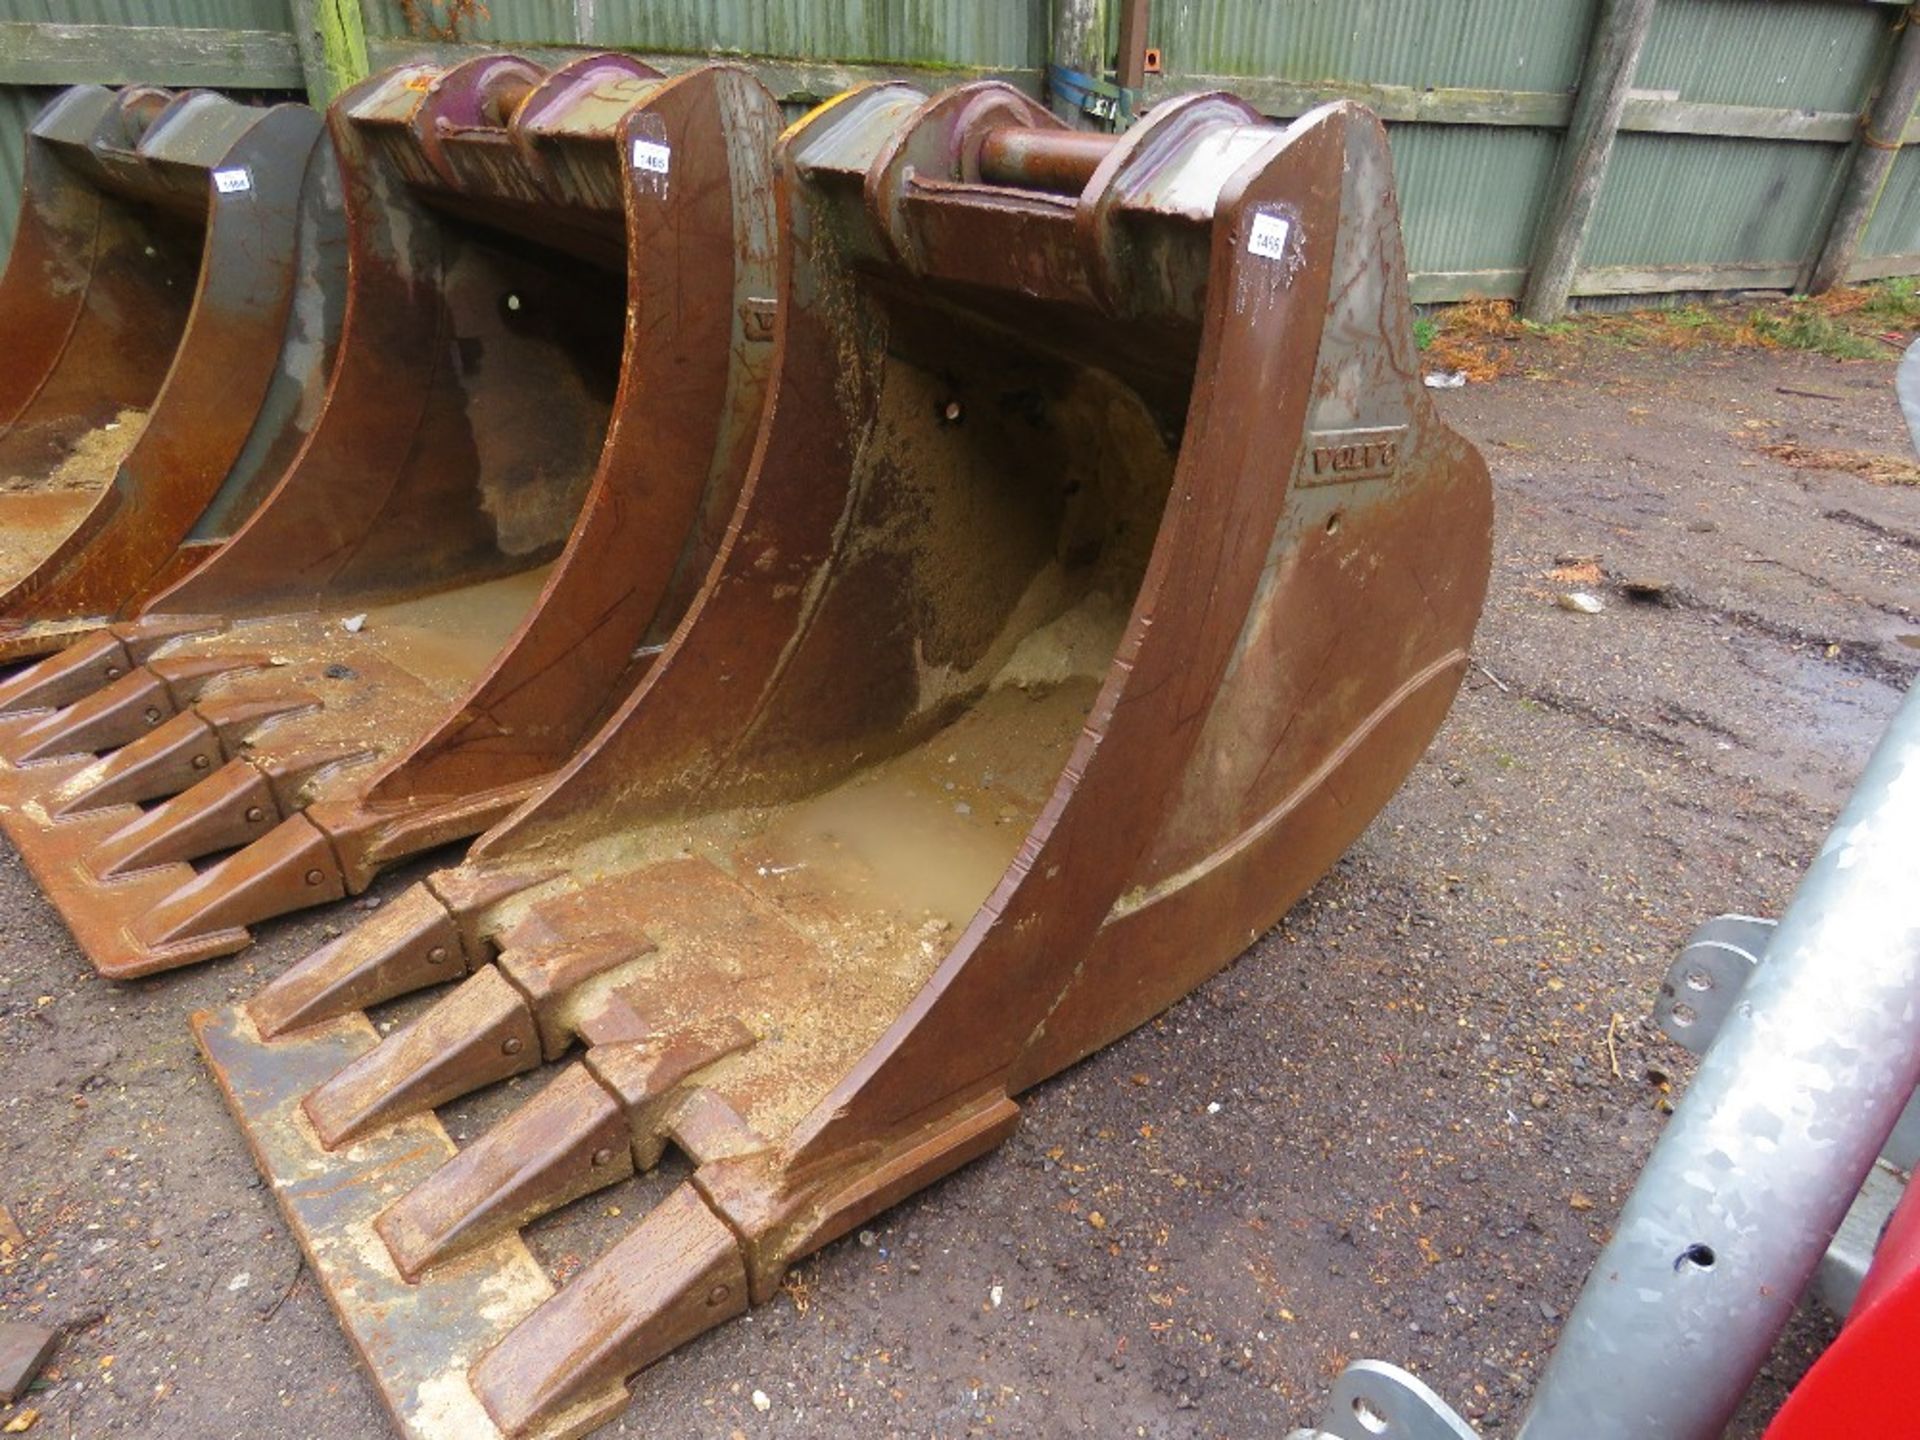 GENUINE VOLVO EXCAVATOR BUCKET SUITABLE FOR 35TONNE EXCAVATOR ON 90MM PINS. 0.9M WIDTH APPROX. APPEA - Image 2 of 4